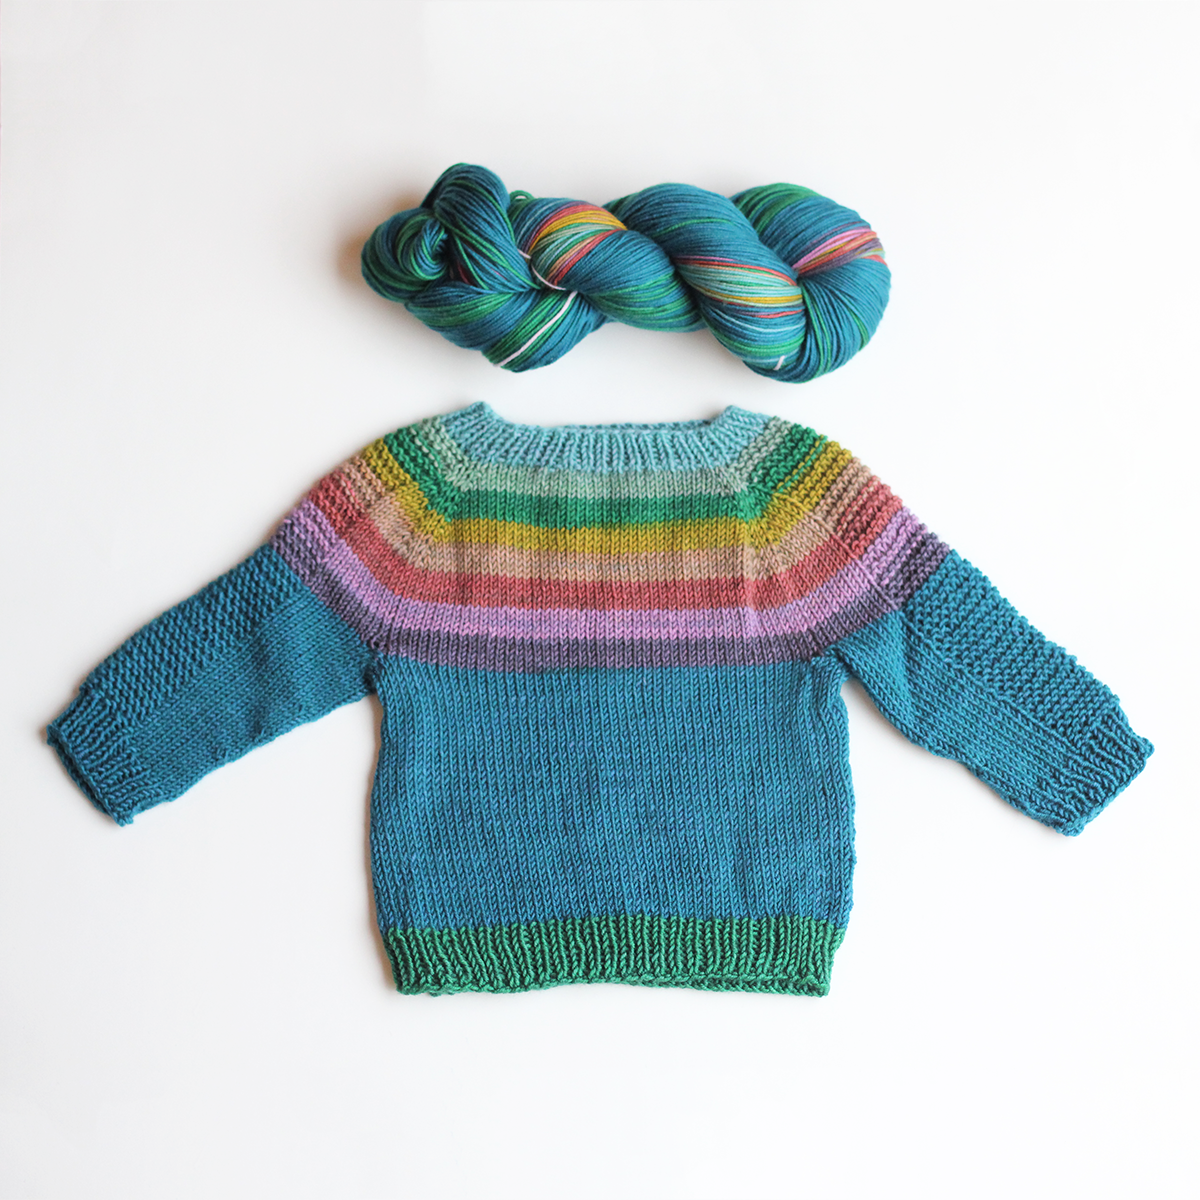 Flax Light knit sweater by Tin Can Knits | Rainbow White Light self striping yarn from Gauge Dye Works